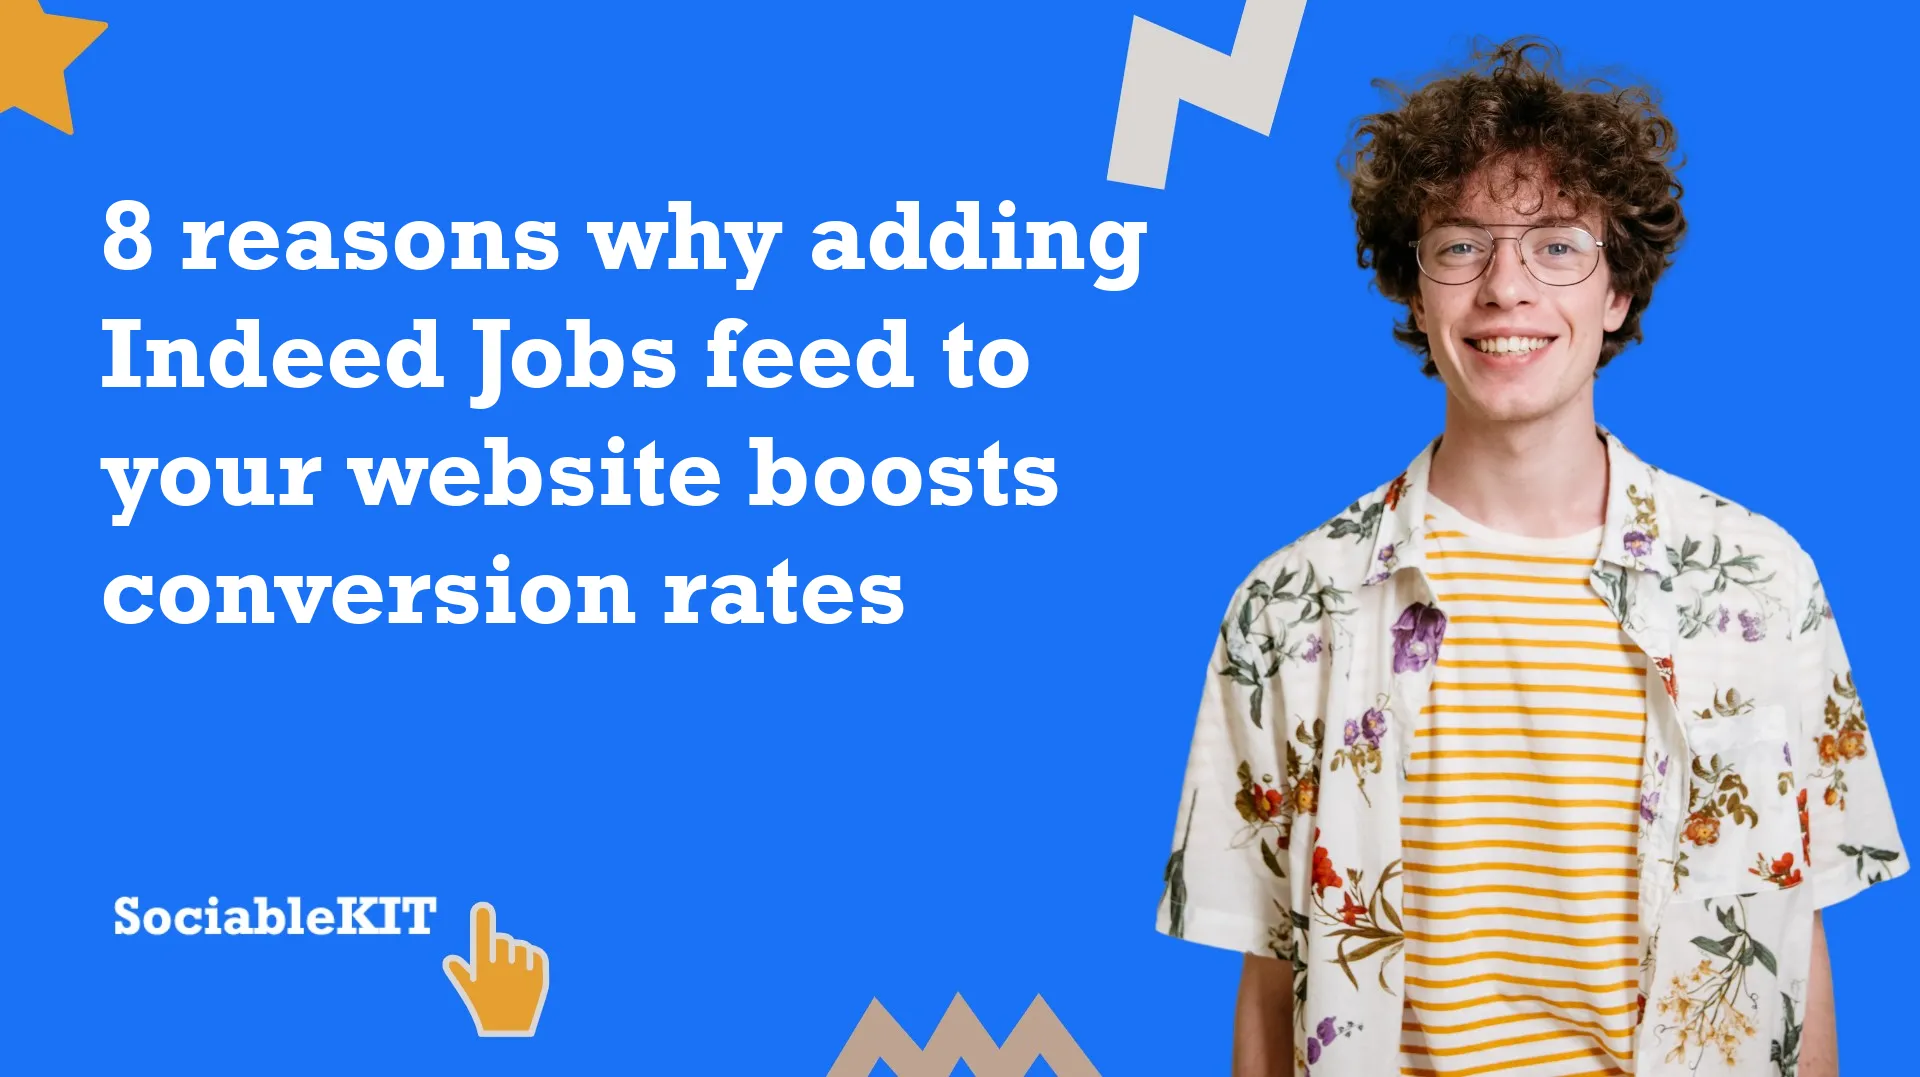 8 reasons why adding Indeed Jobs feed to your website boosts conversion rates